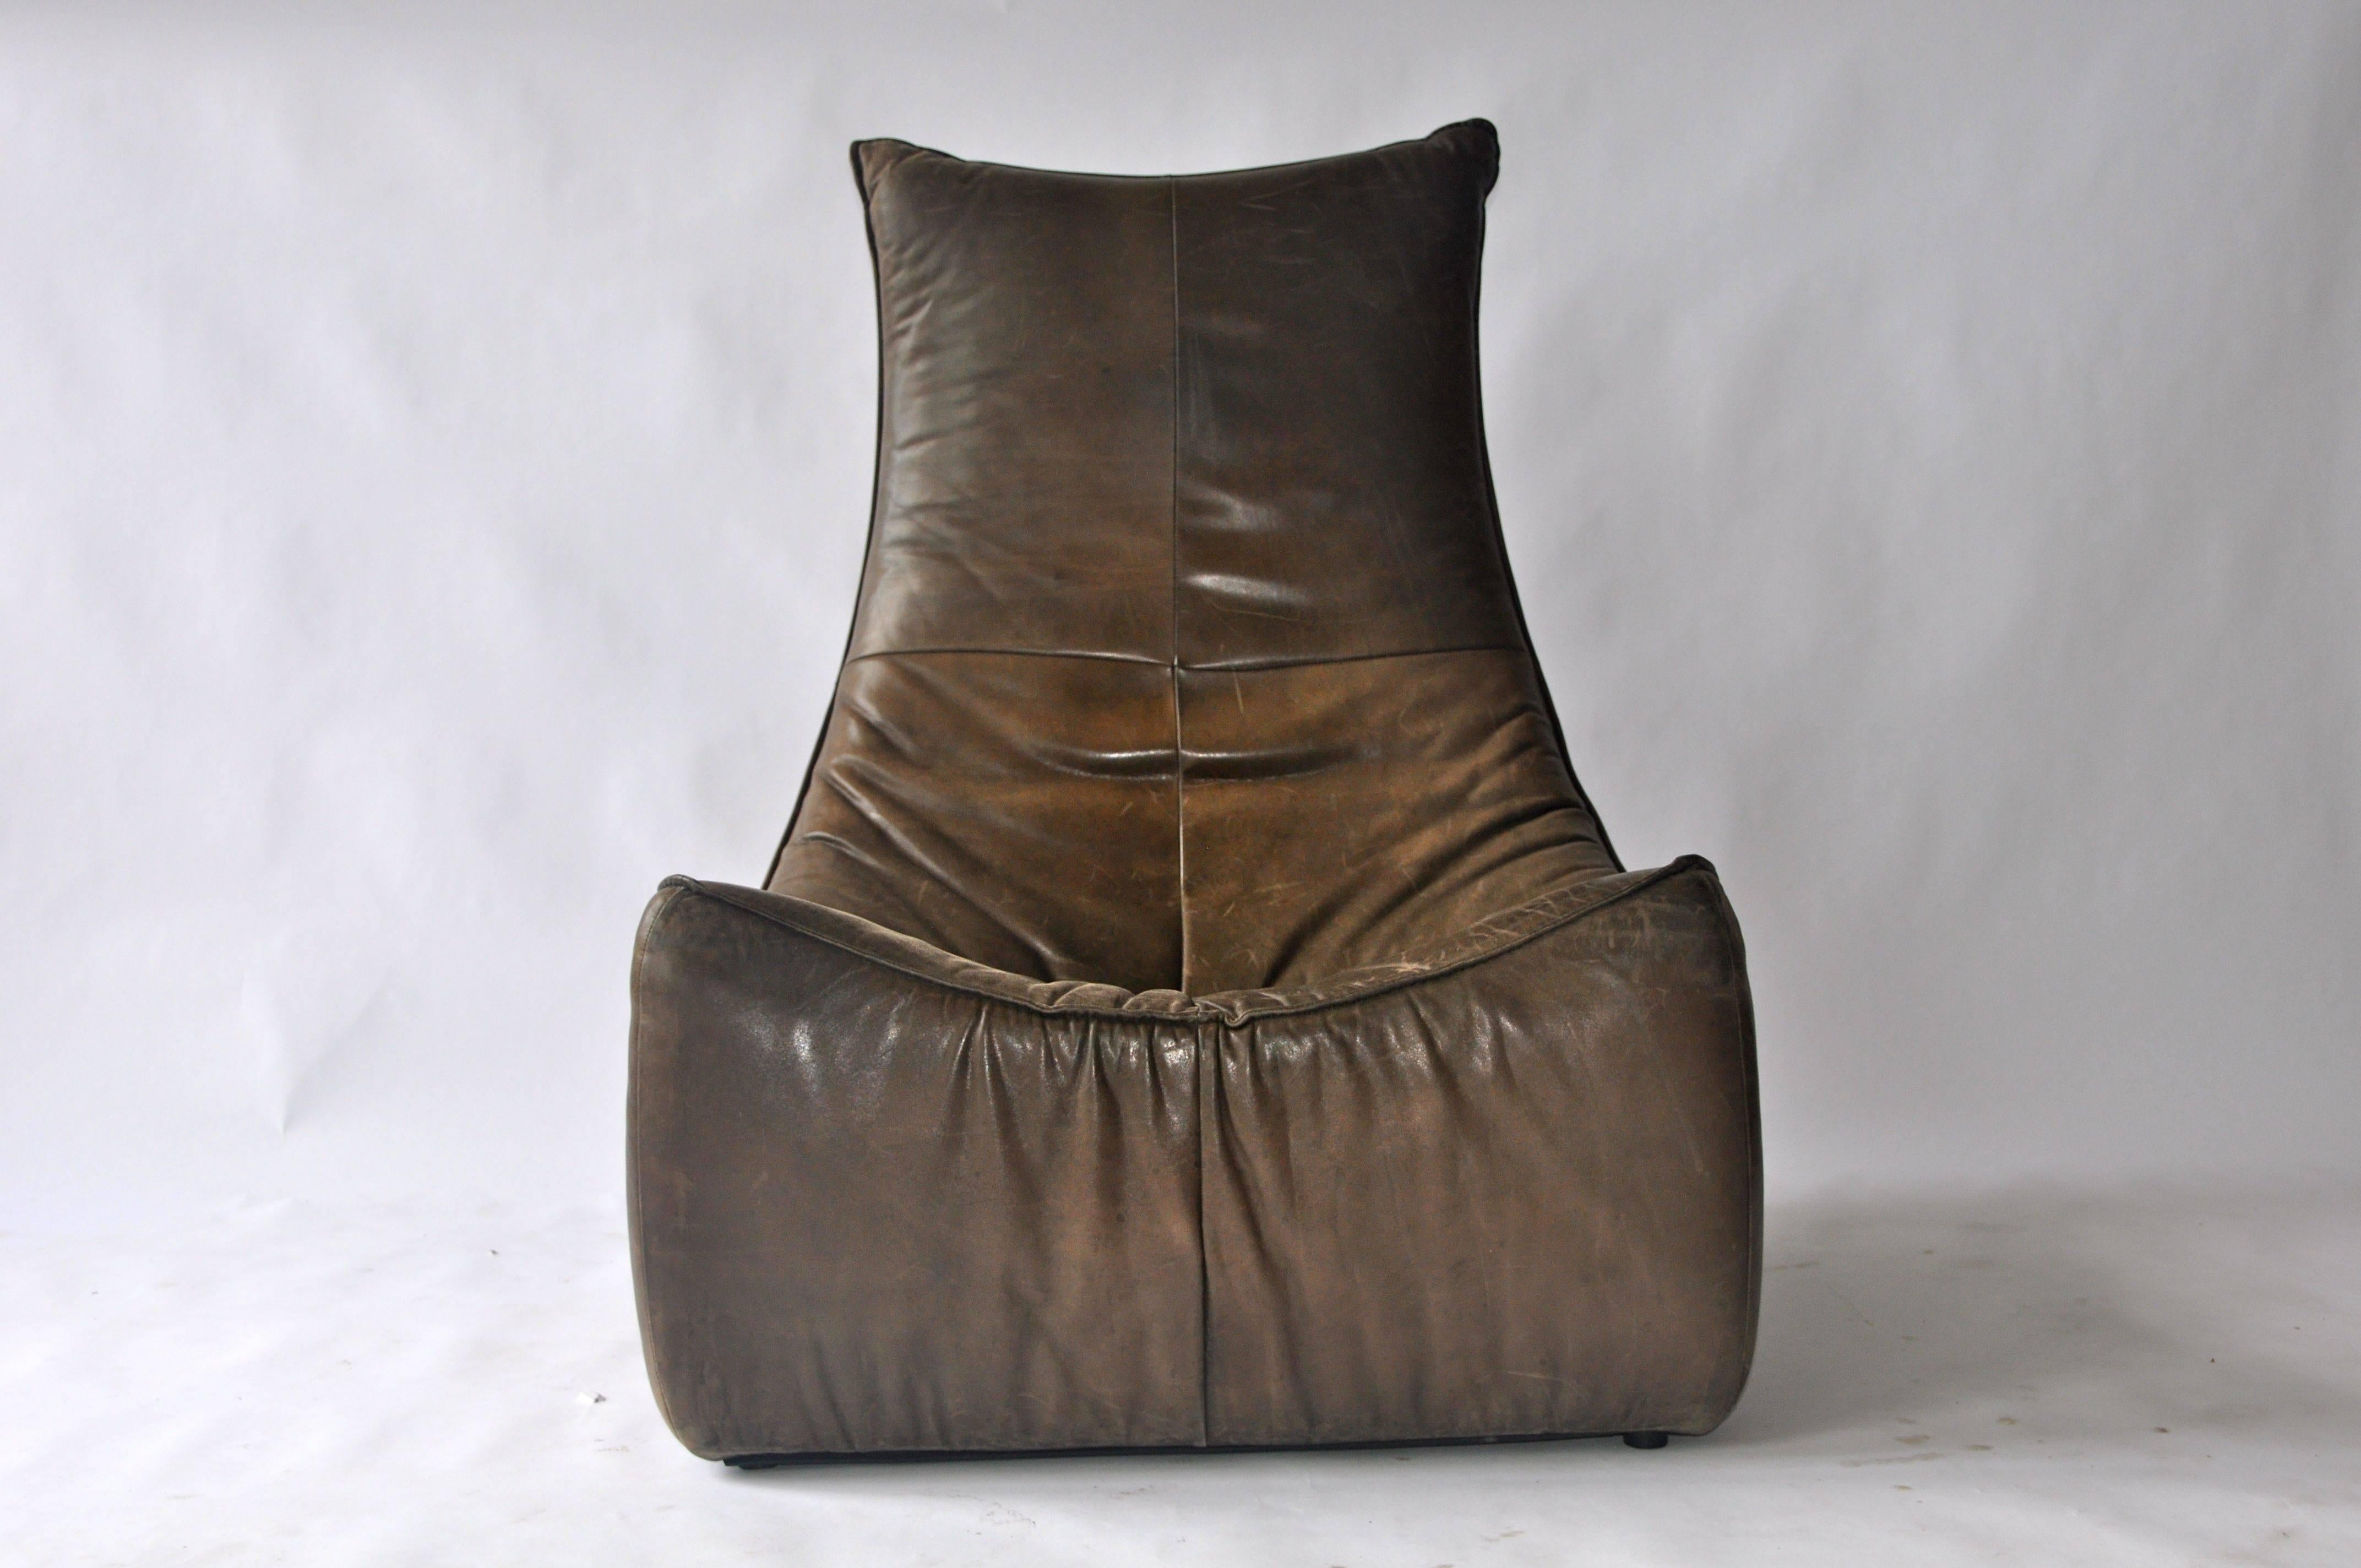 1970s leather chair by Gerard Van Den Berg for Montis. Original leather.